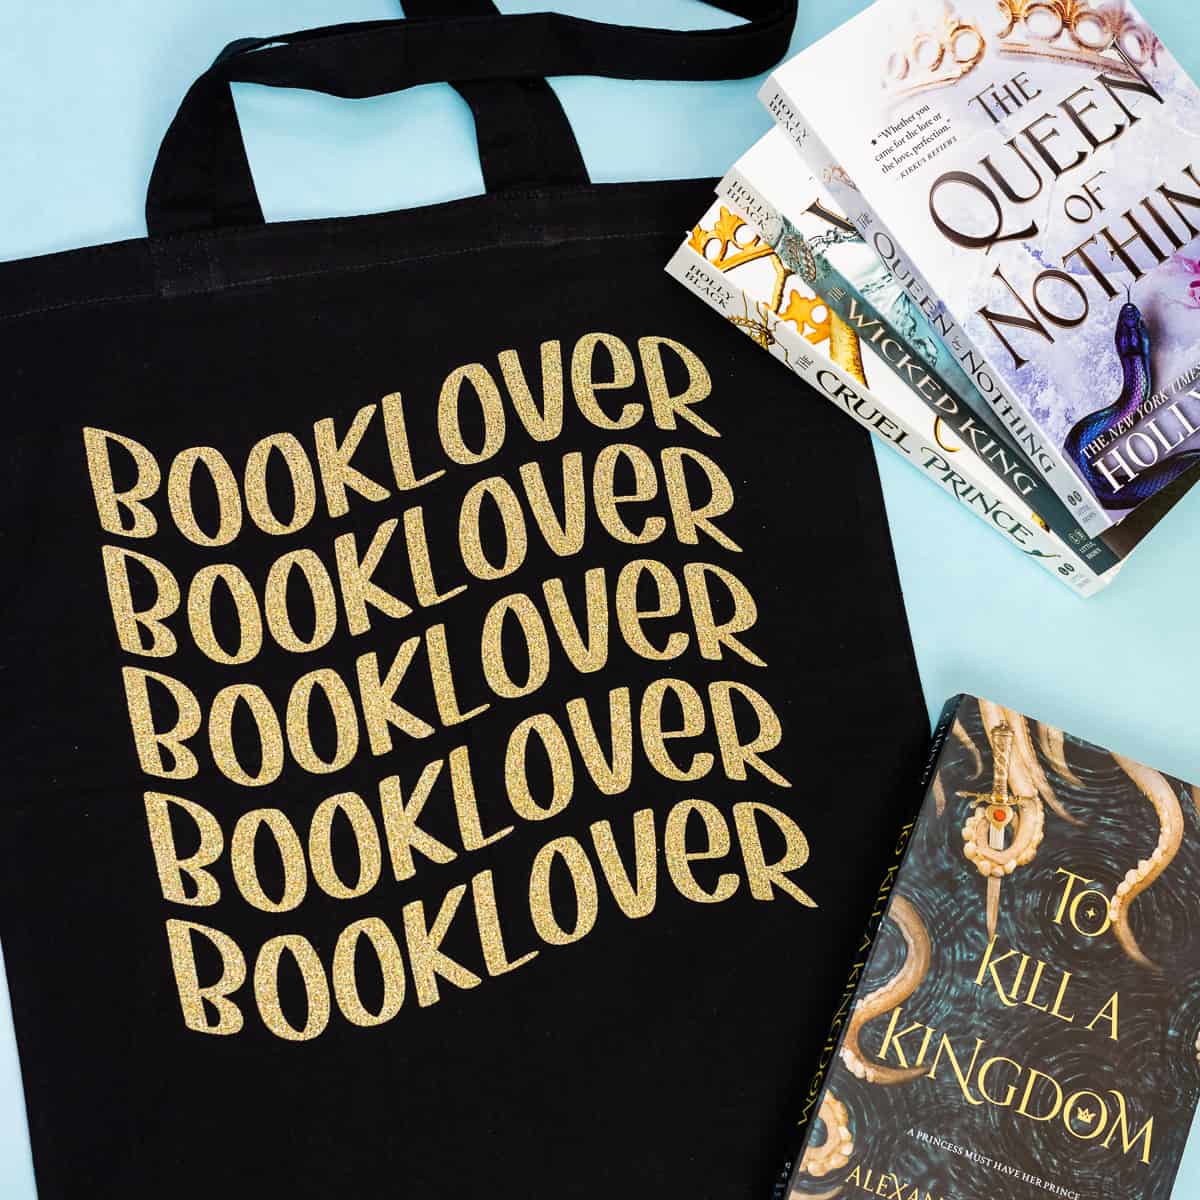 Booklover Library Tote Bag